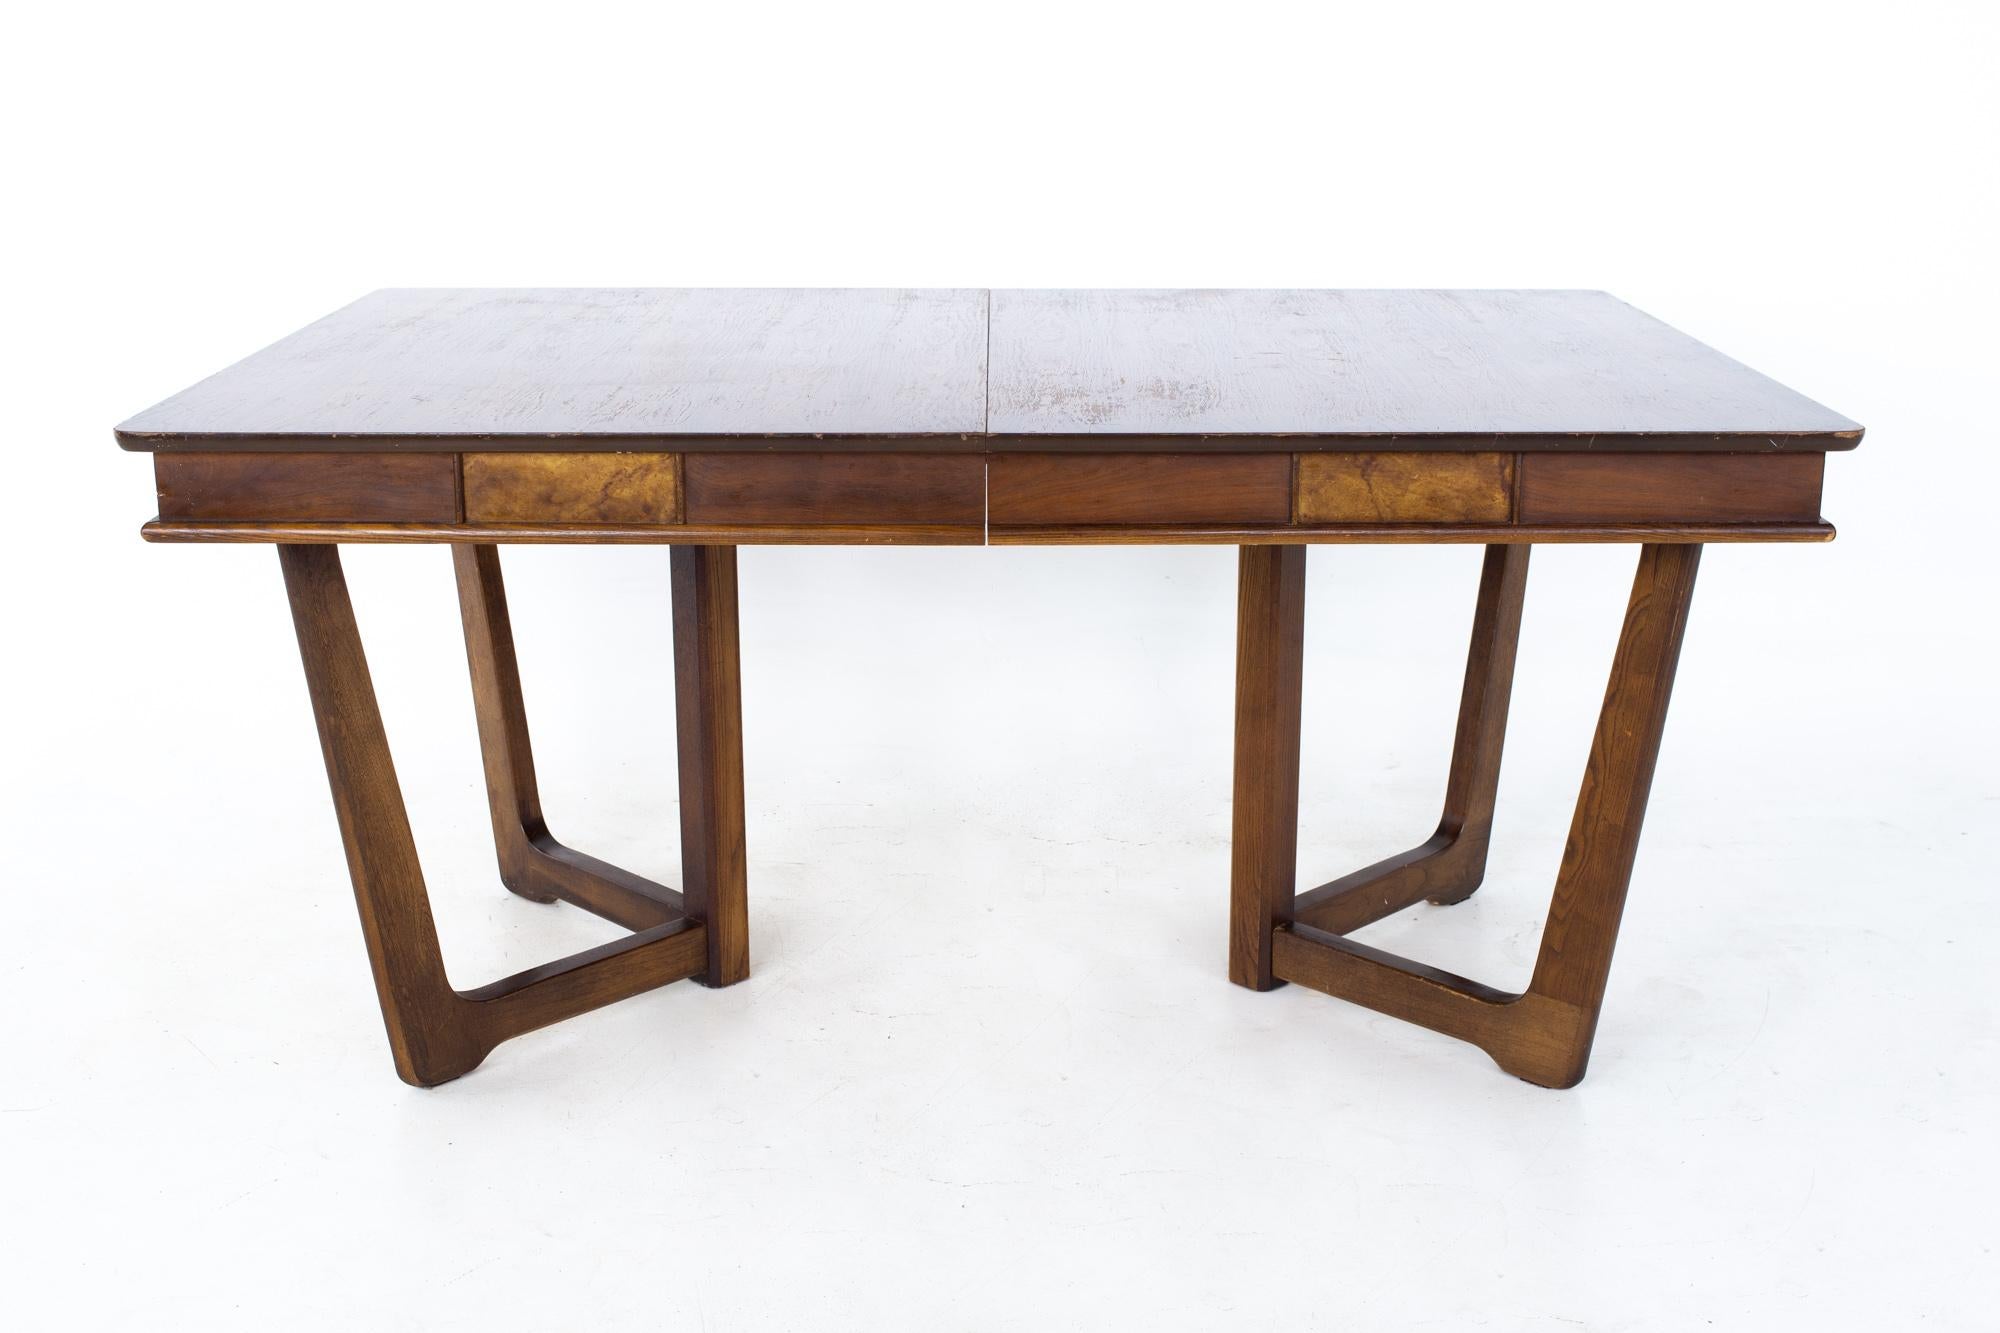 Mid century walnut dining table
Table measures: 42 wide x 64 deep x 30.5 inches high, with a chair clearance of 26 inches 

All pieces of furniture can be had in what we call restored vintage condition. That means the piece is restored upon